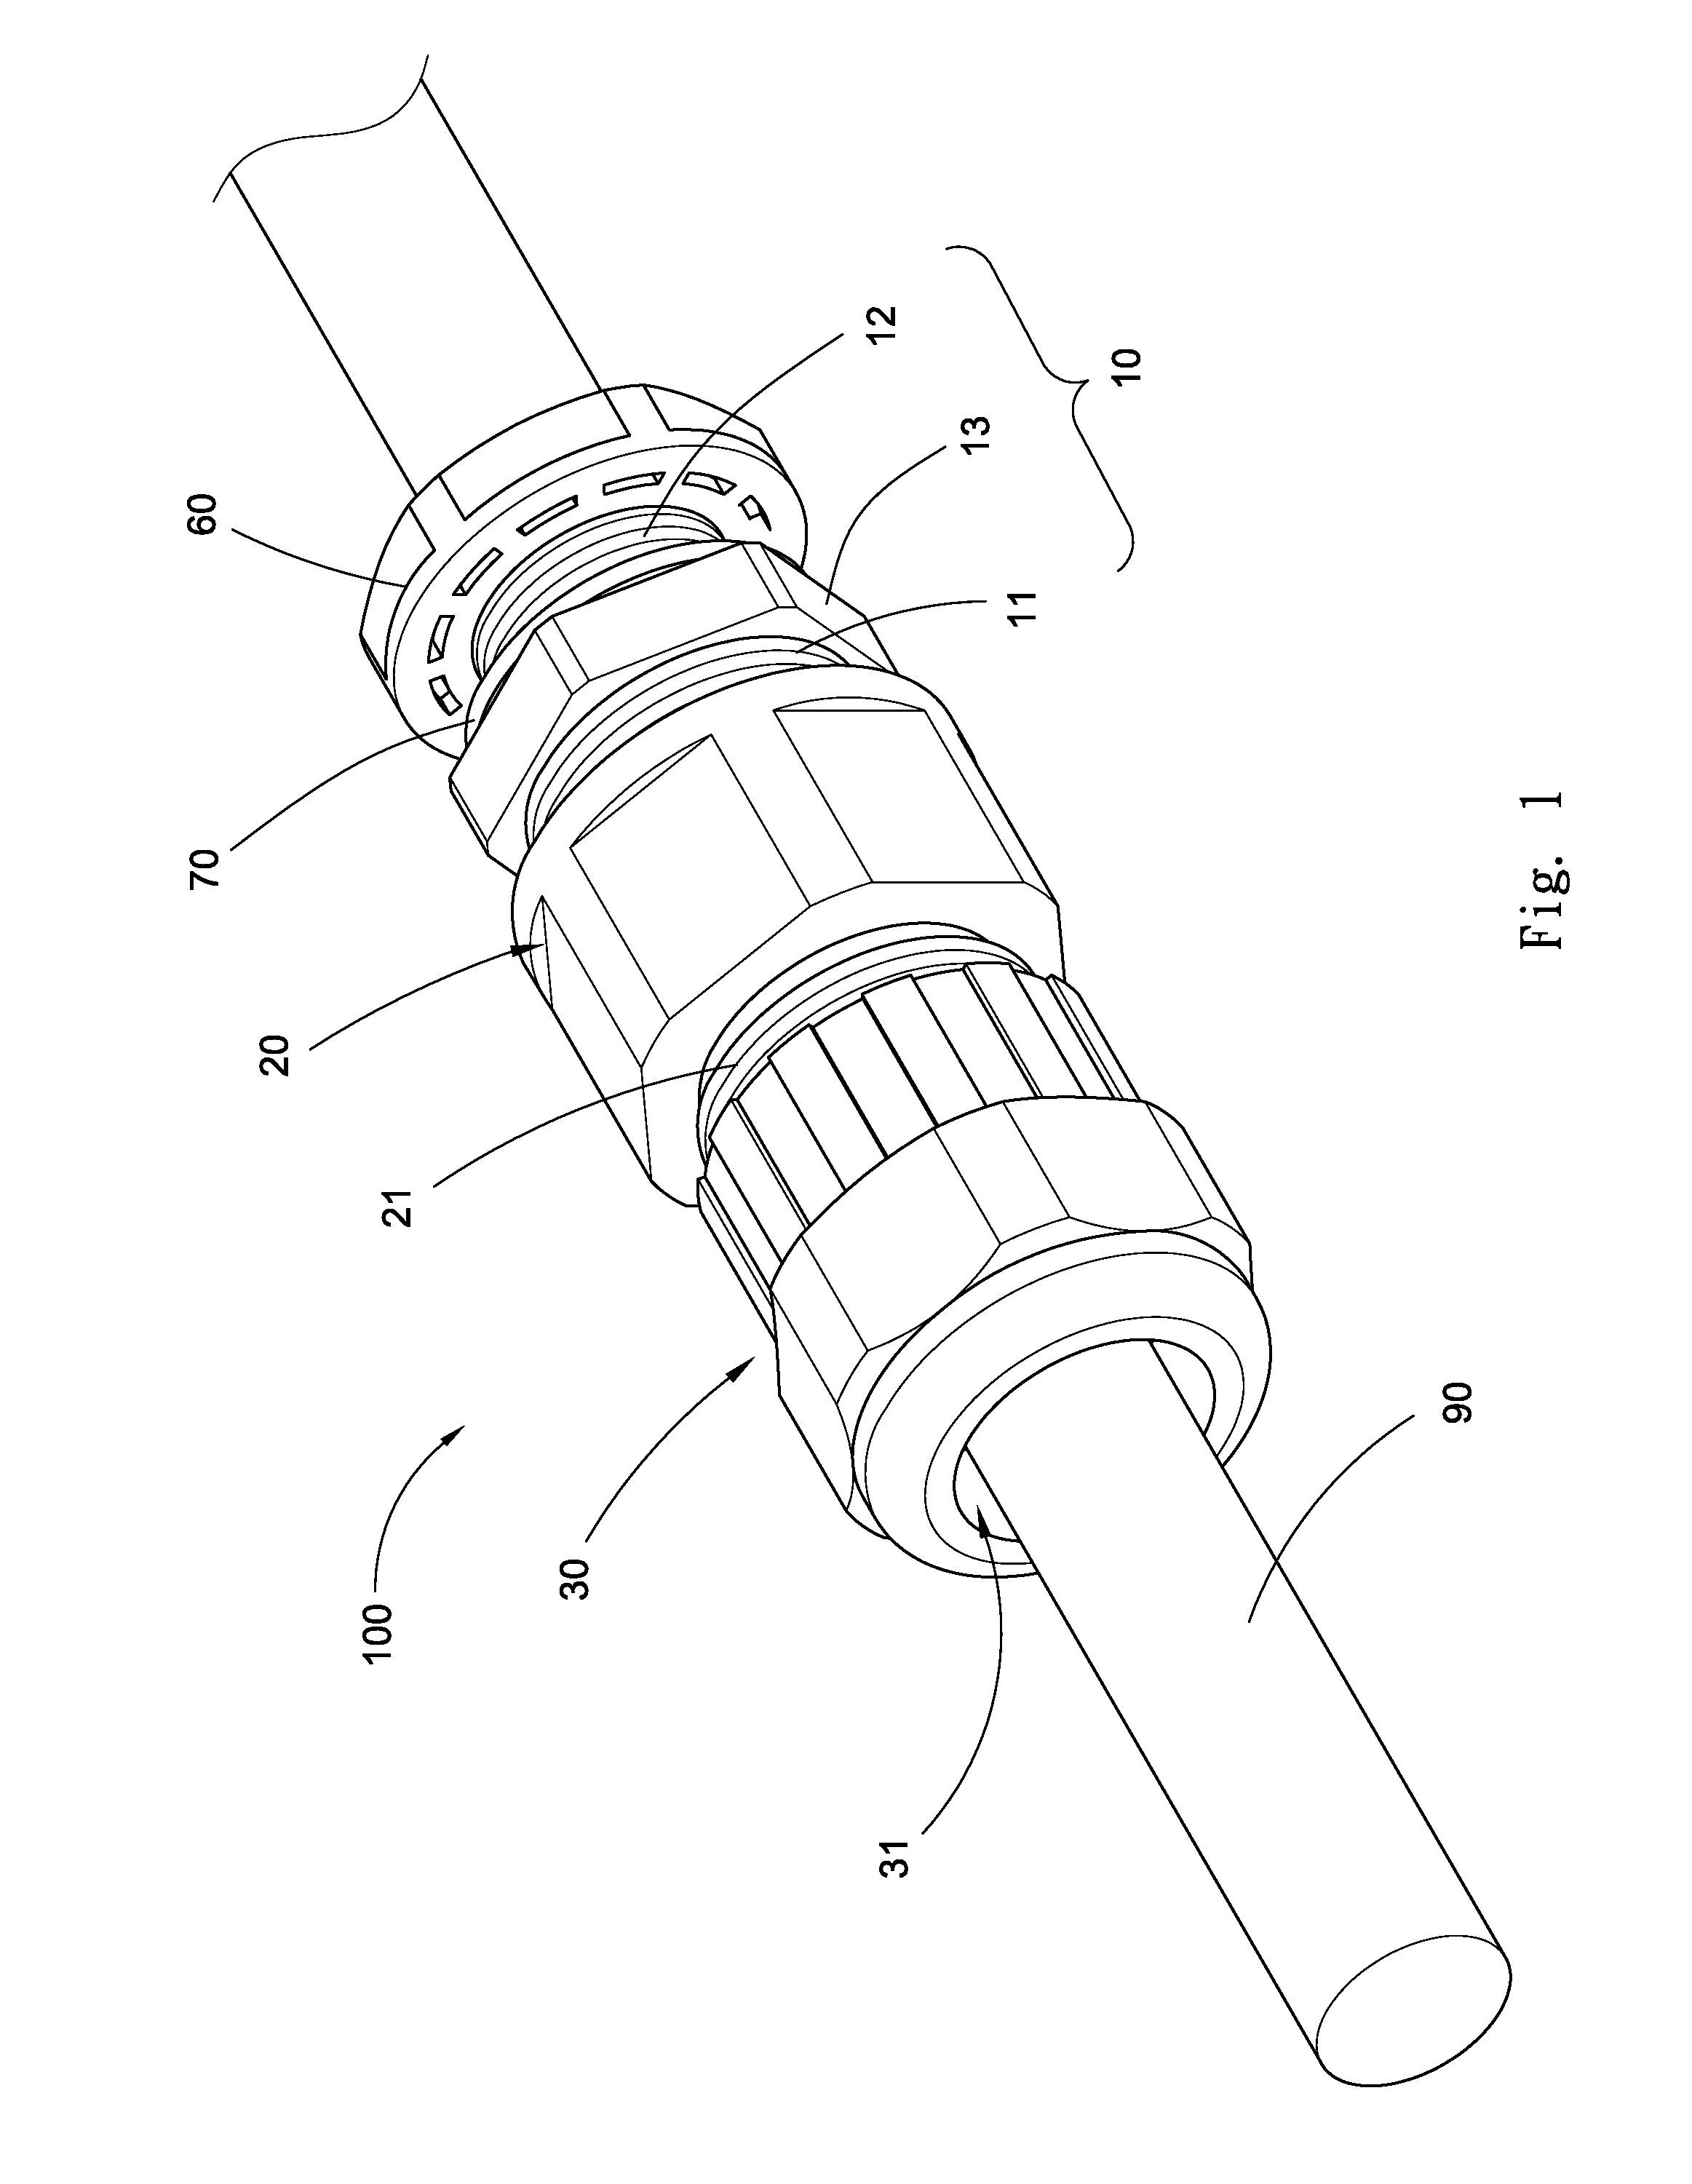 Cable gland assembly